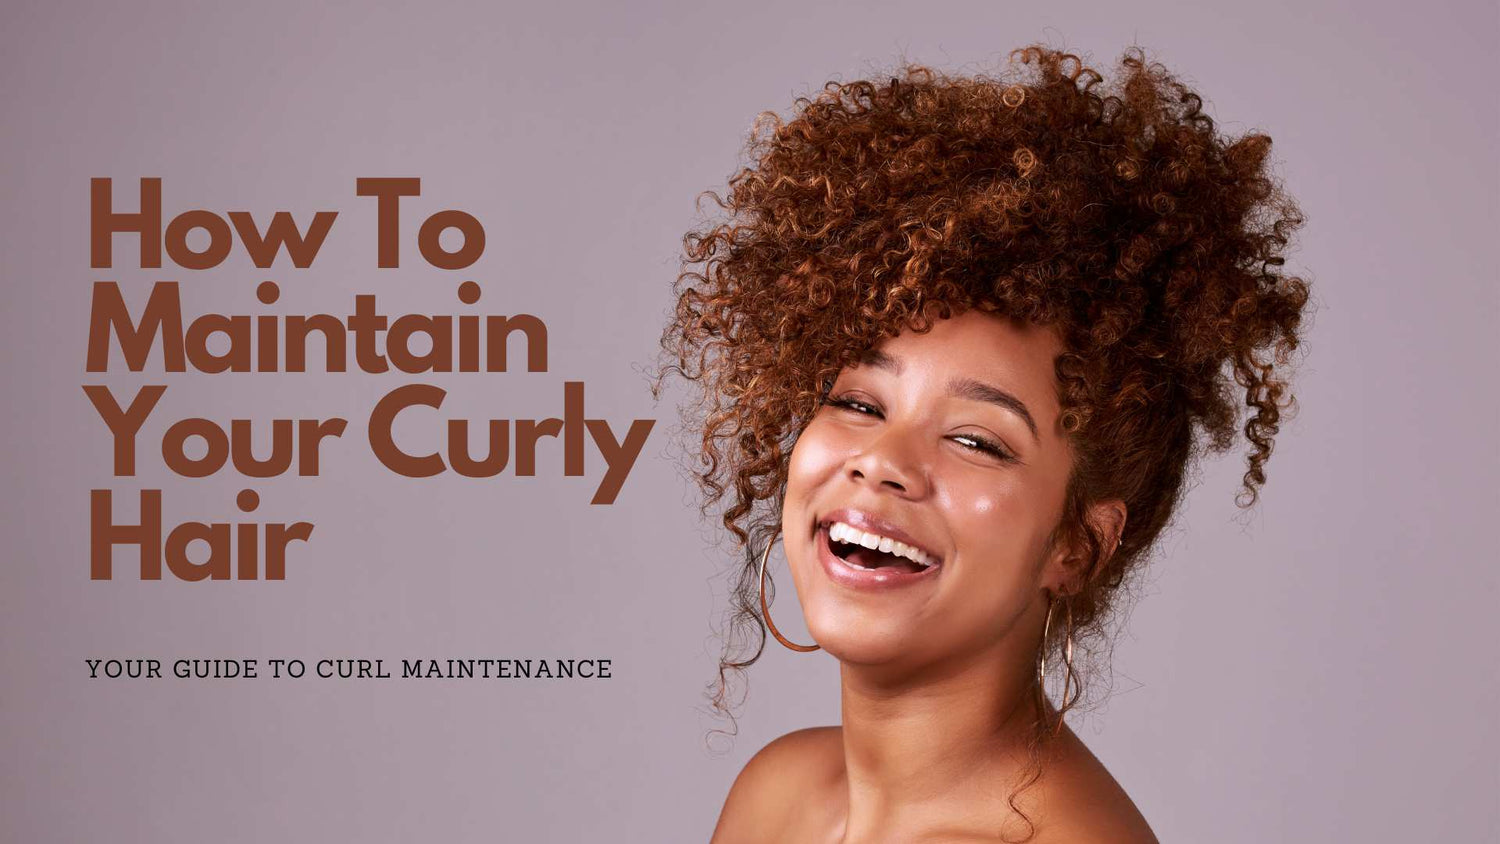 Curly girl with text 'How to maintain your curly hair'